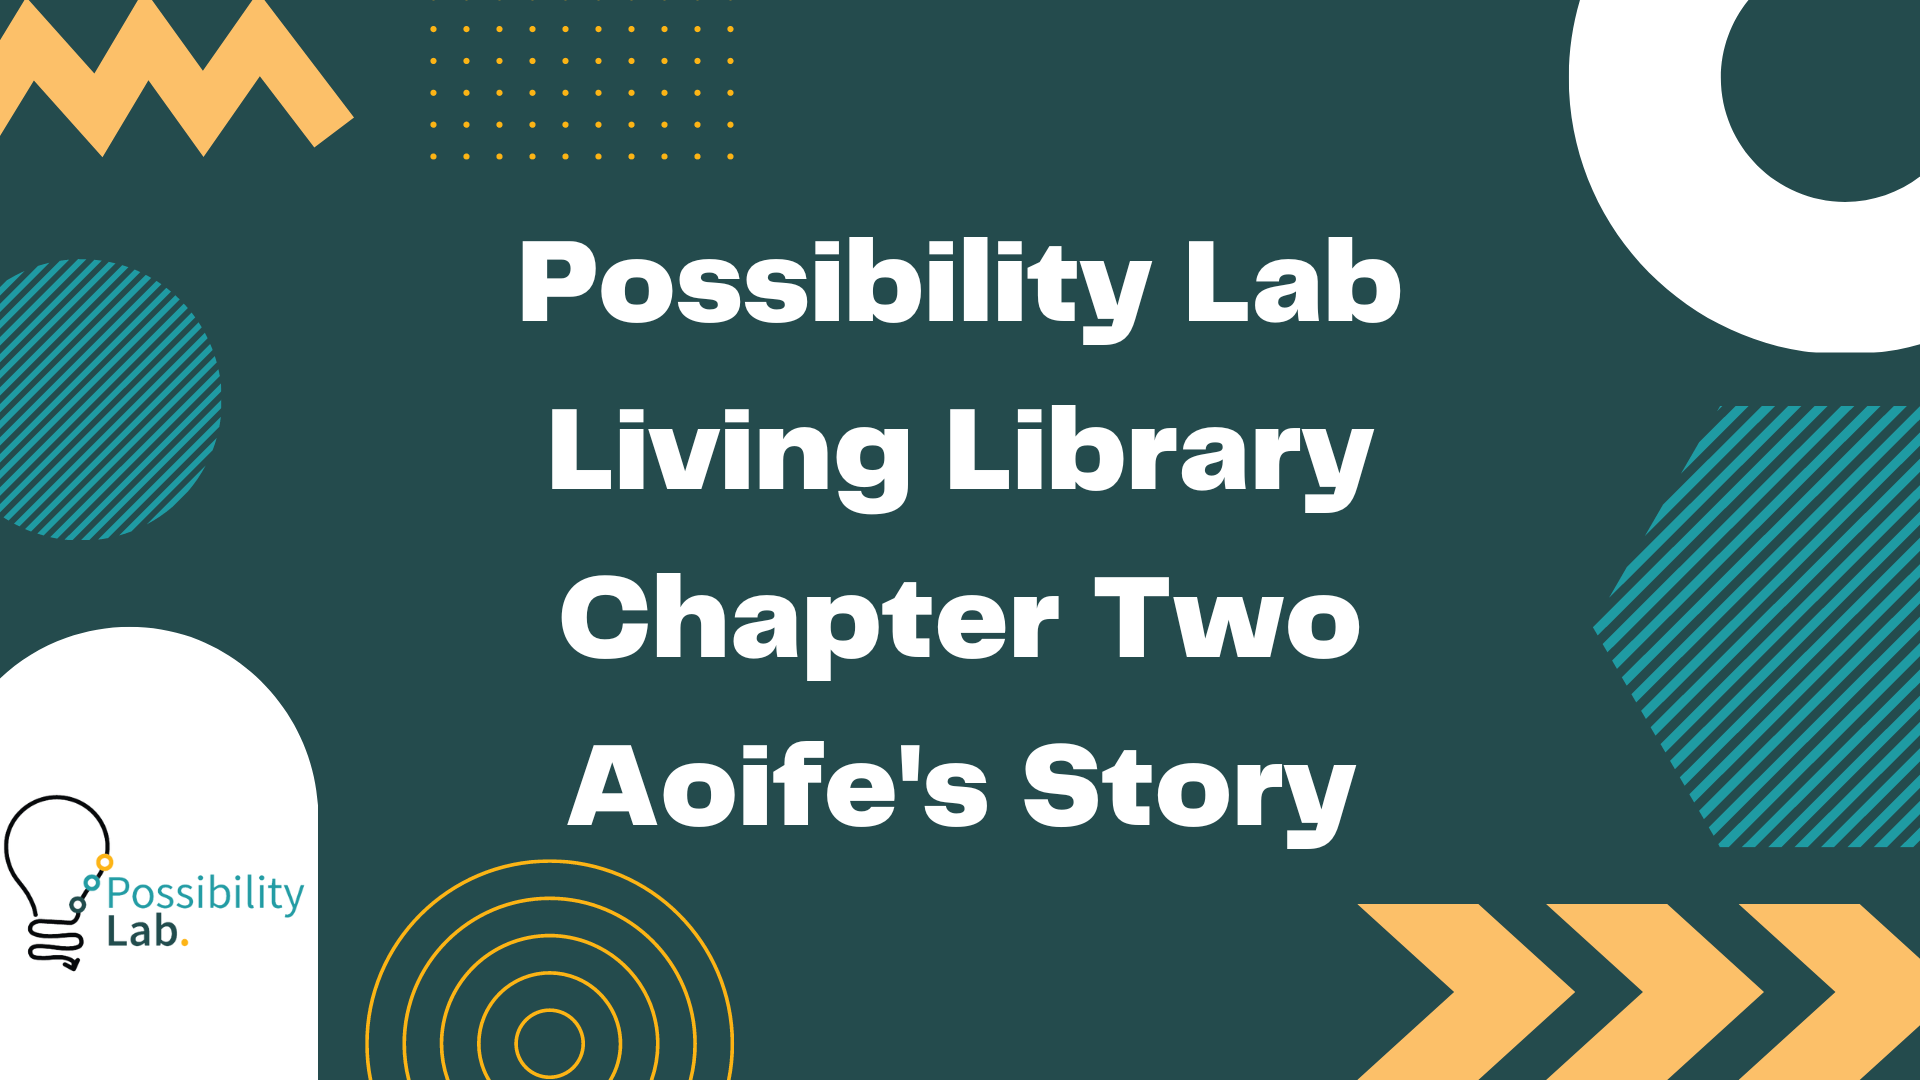 A slide from our living library videos. It has a green background and squiggle designs in white, lighter green and orange. The possibility lab logo is on the bottom left and text on the slide reads Possibility Lab Living Library Chapter Two Aoife's Story